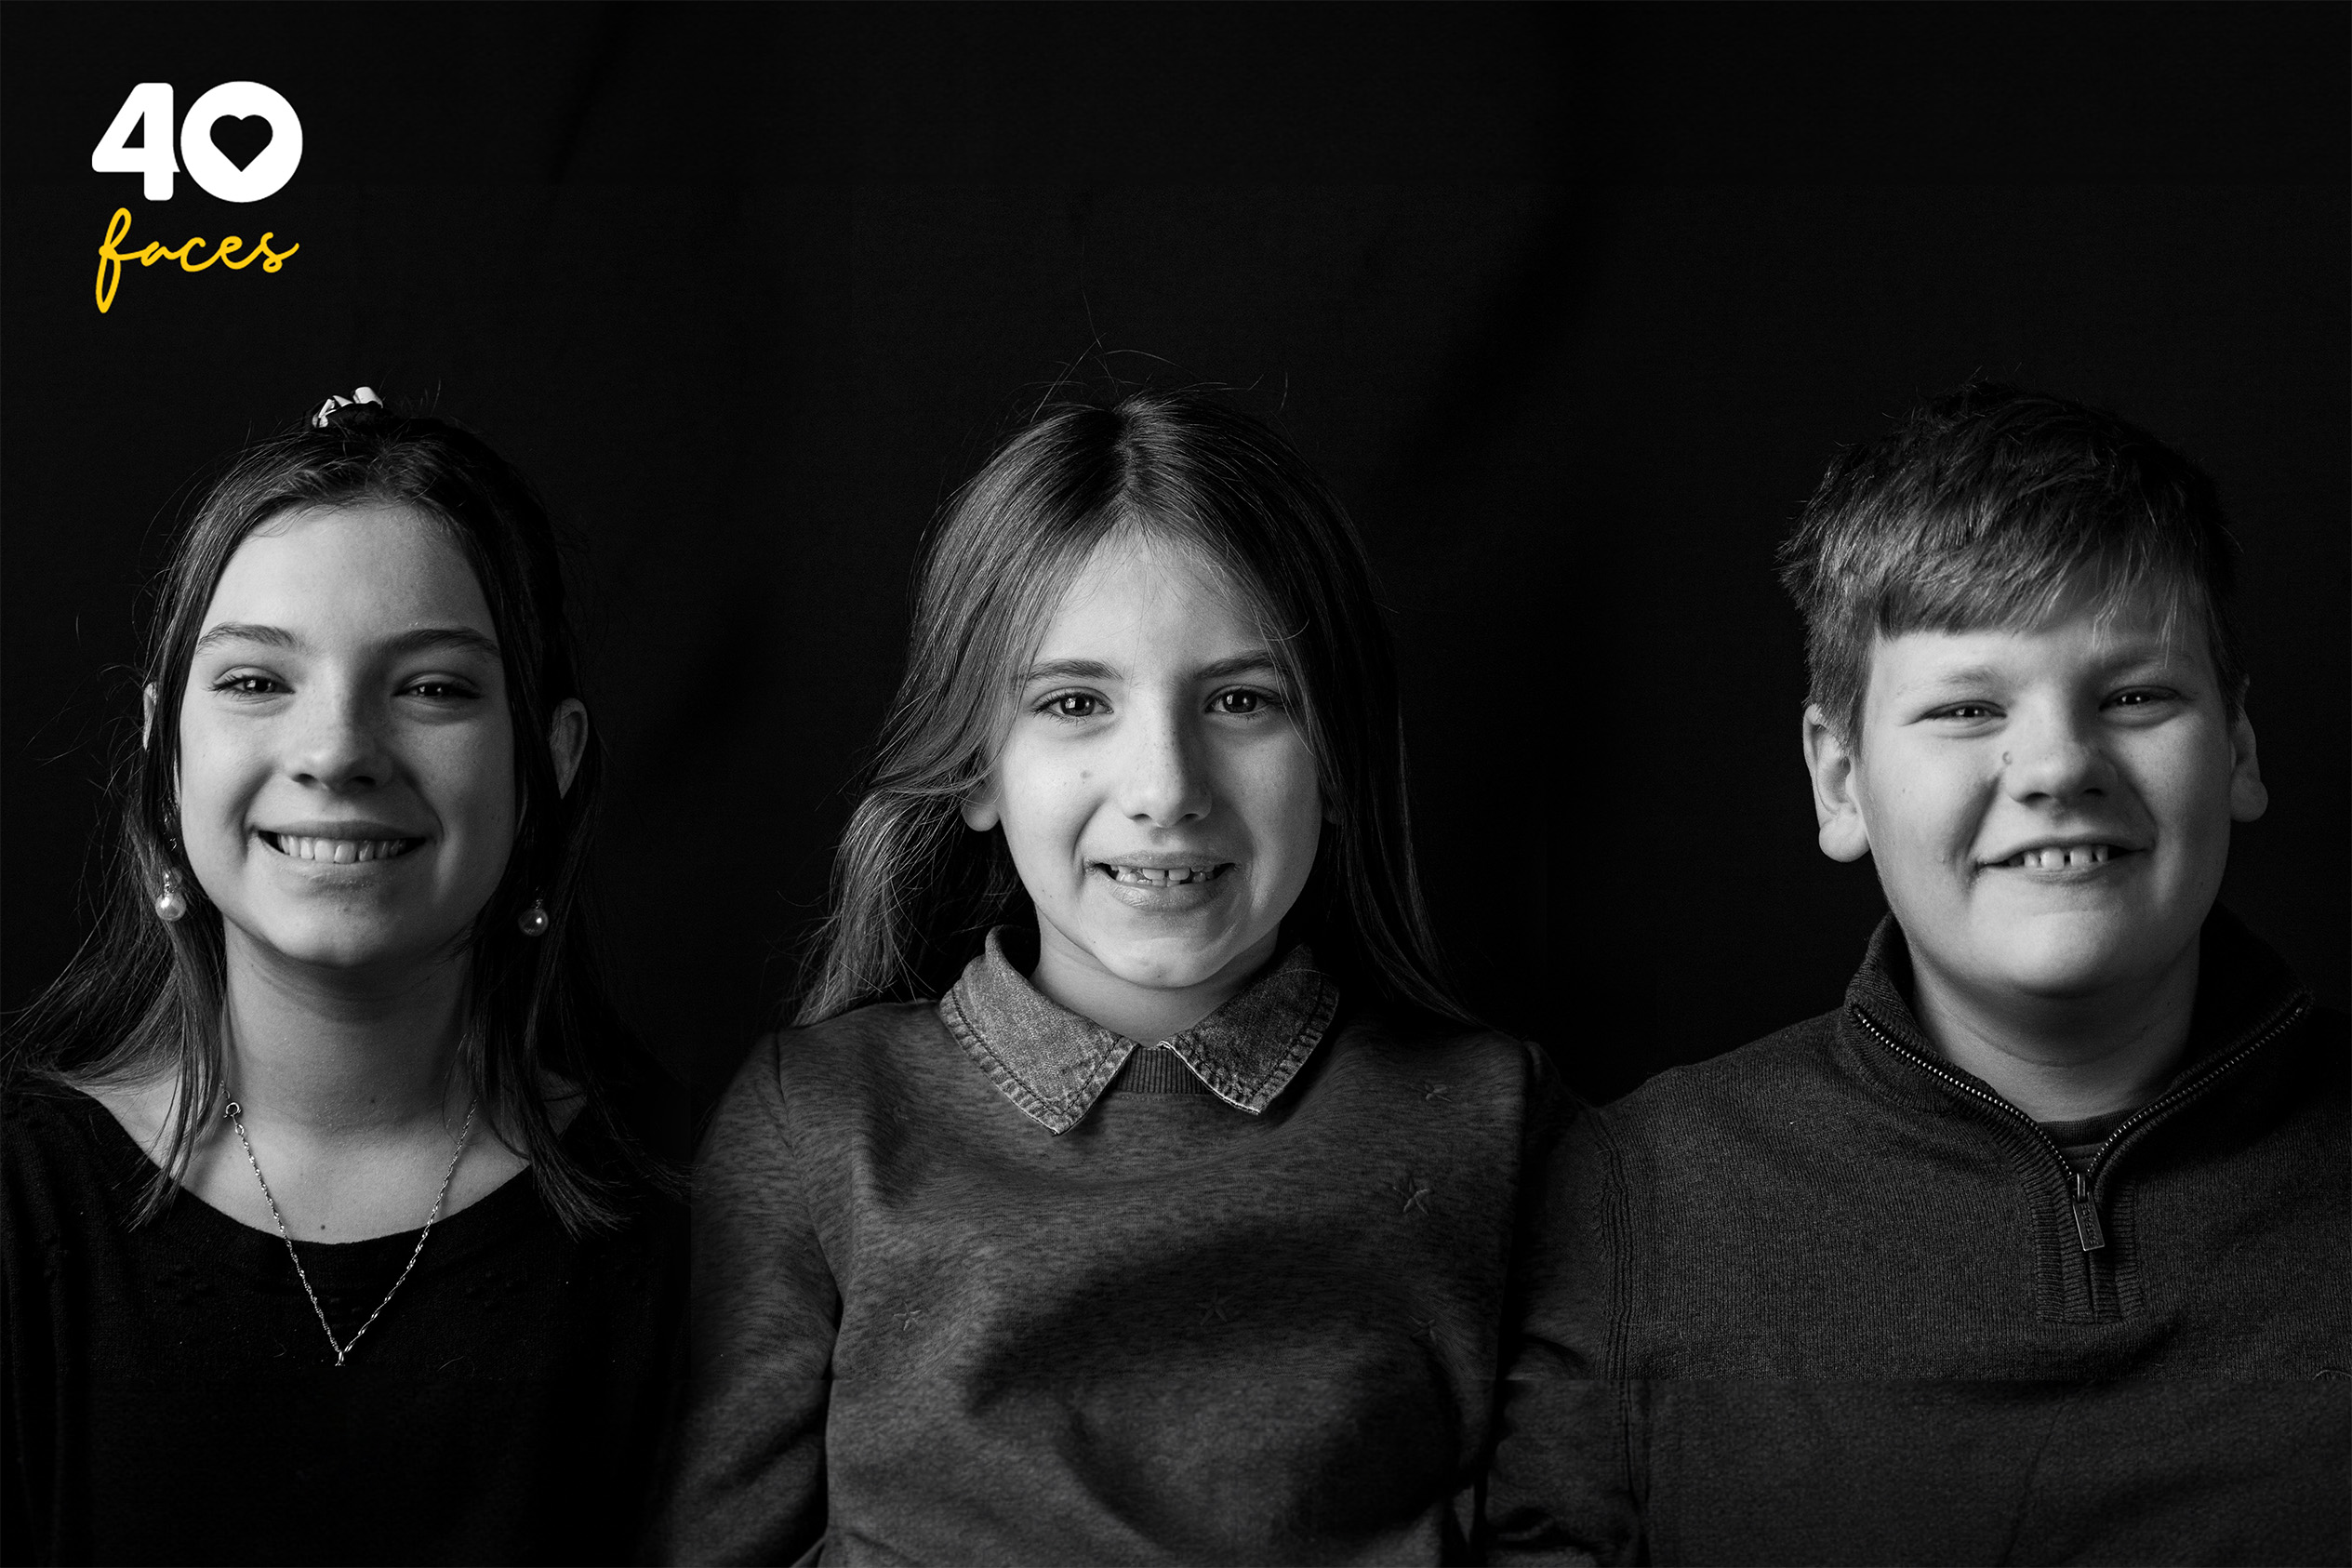 Three children, who are each siblings, 2 girls and 1 boy. All sat together, the photographs are in black and white.